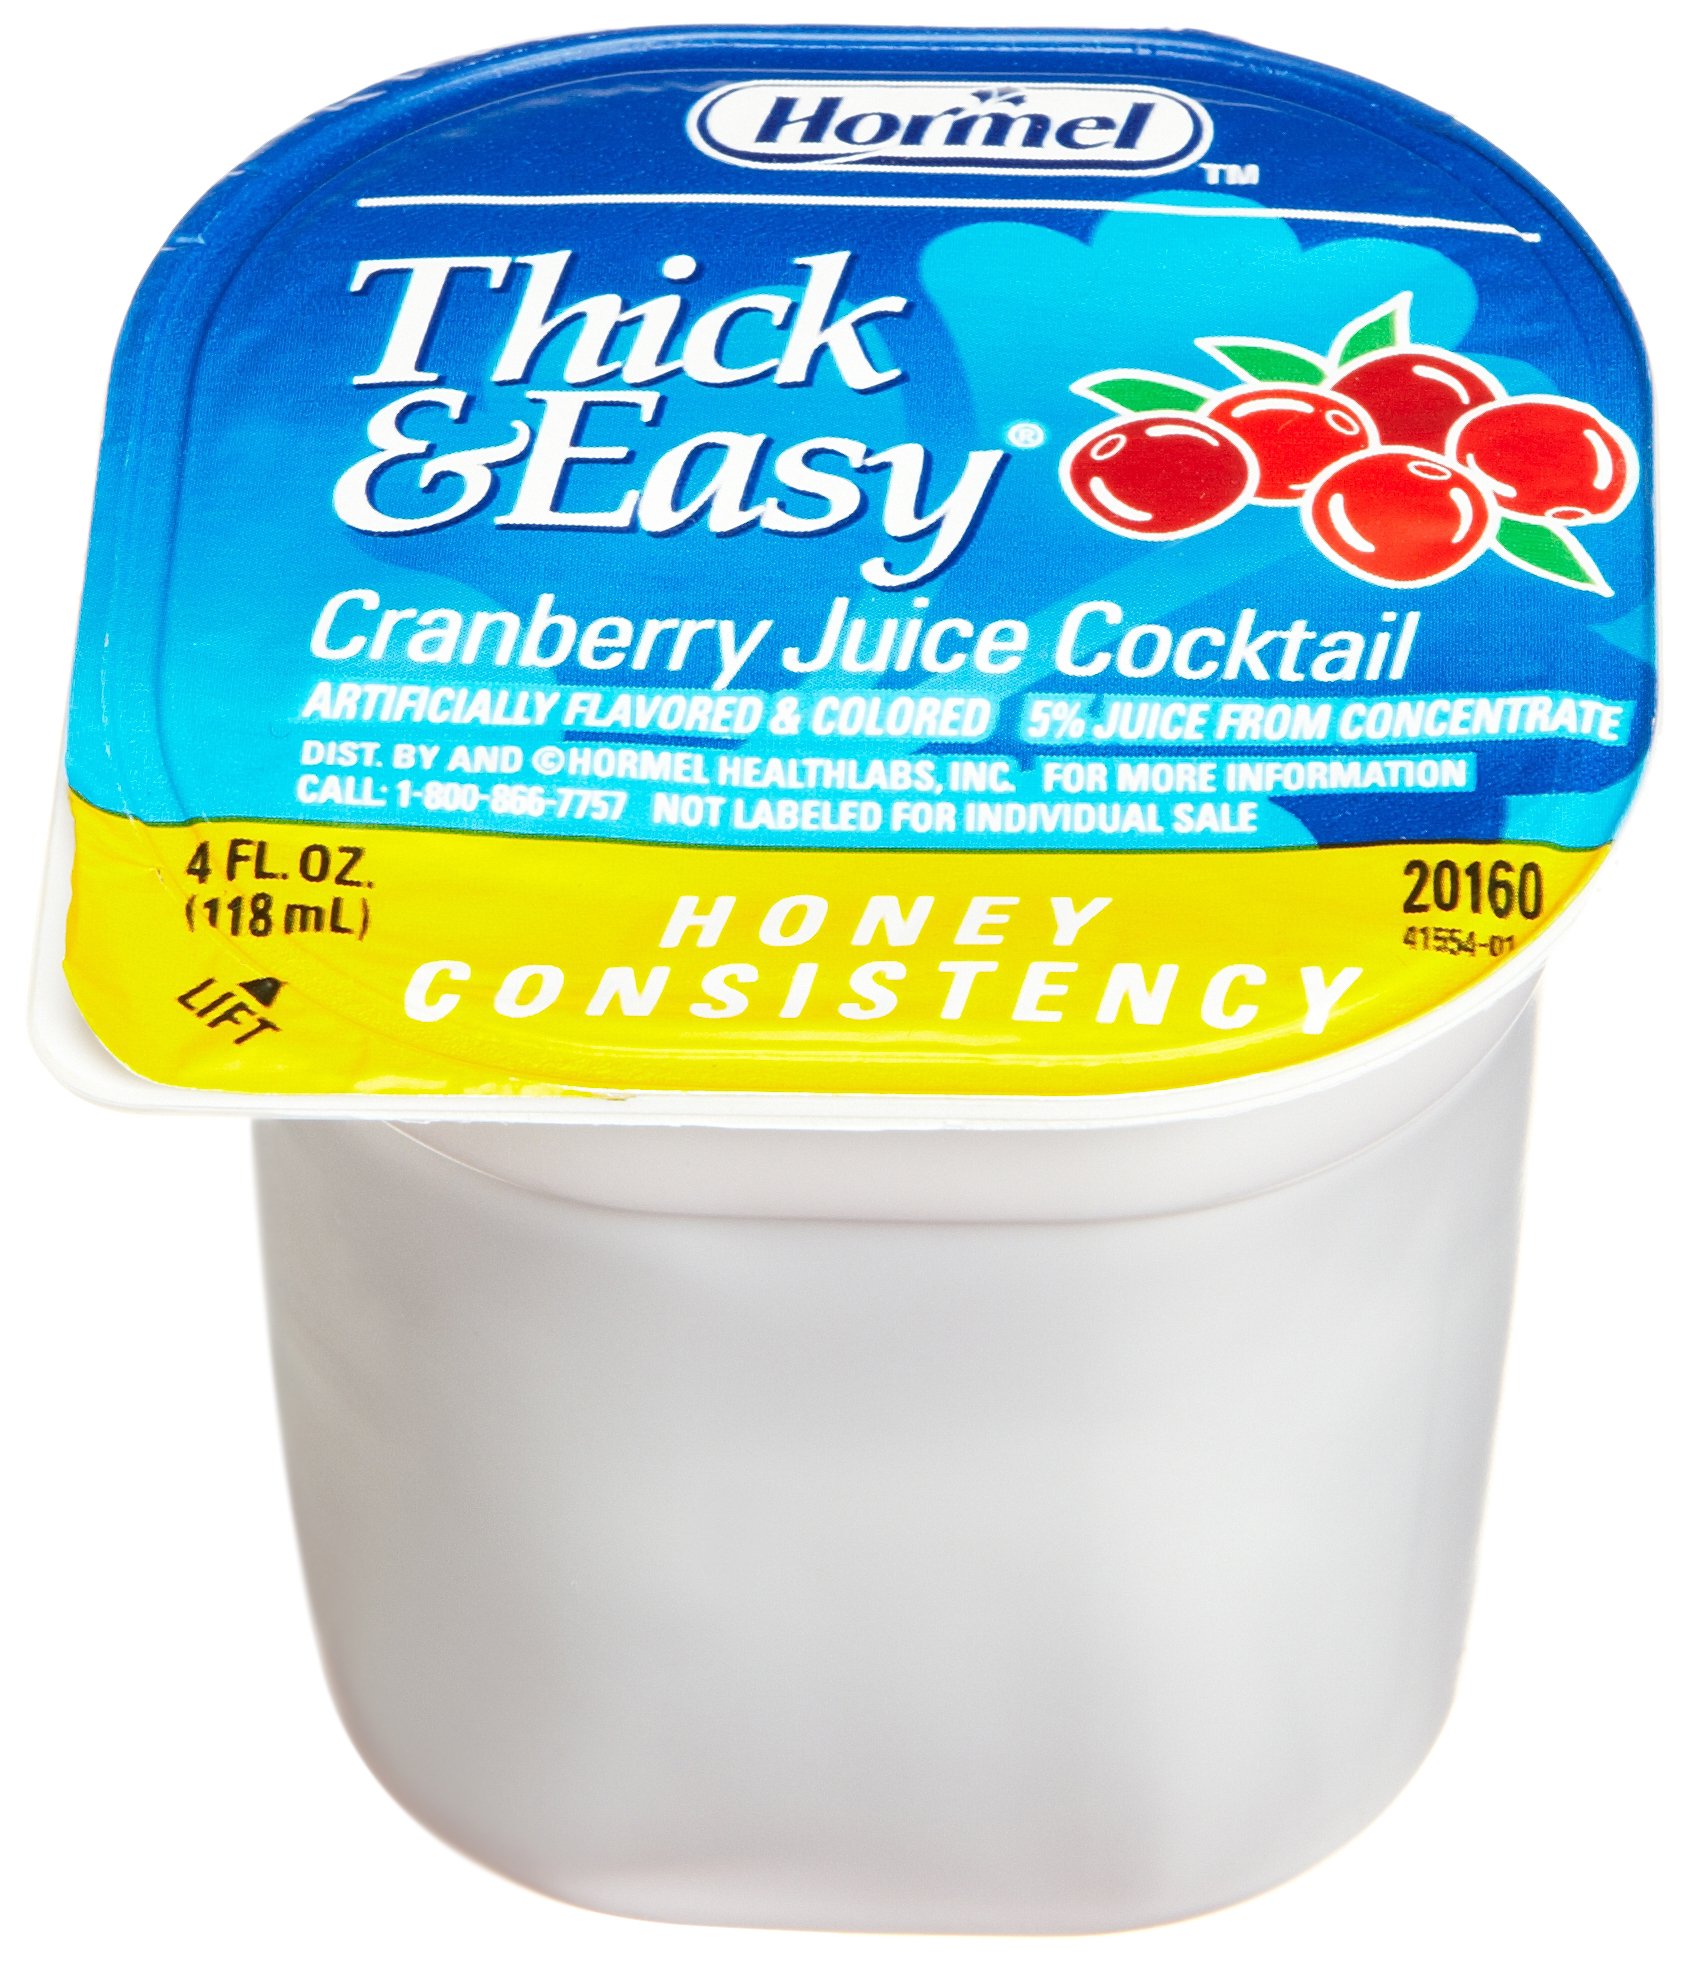 Hormel Thick & Easy Thickened Cranberry Juice Cocktail (Honey Consistency), 4-Ounce Portion Control Cups (Pack of 24)